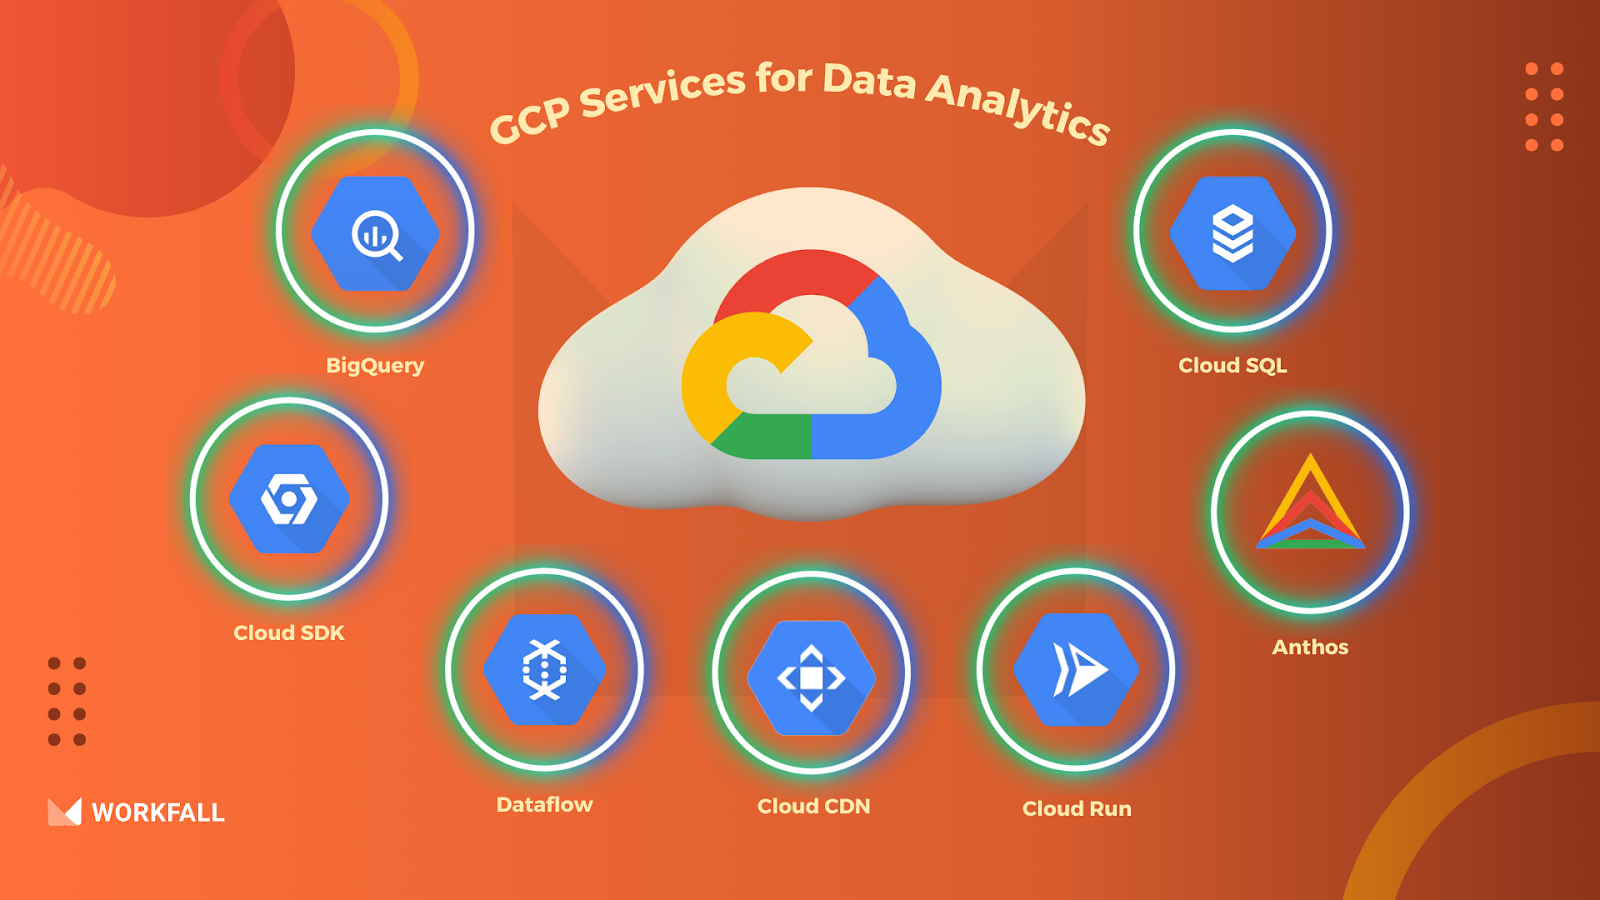 GCP Services for Data Analytics